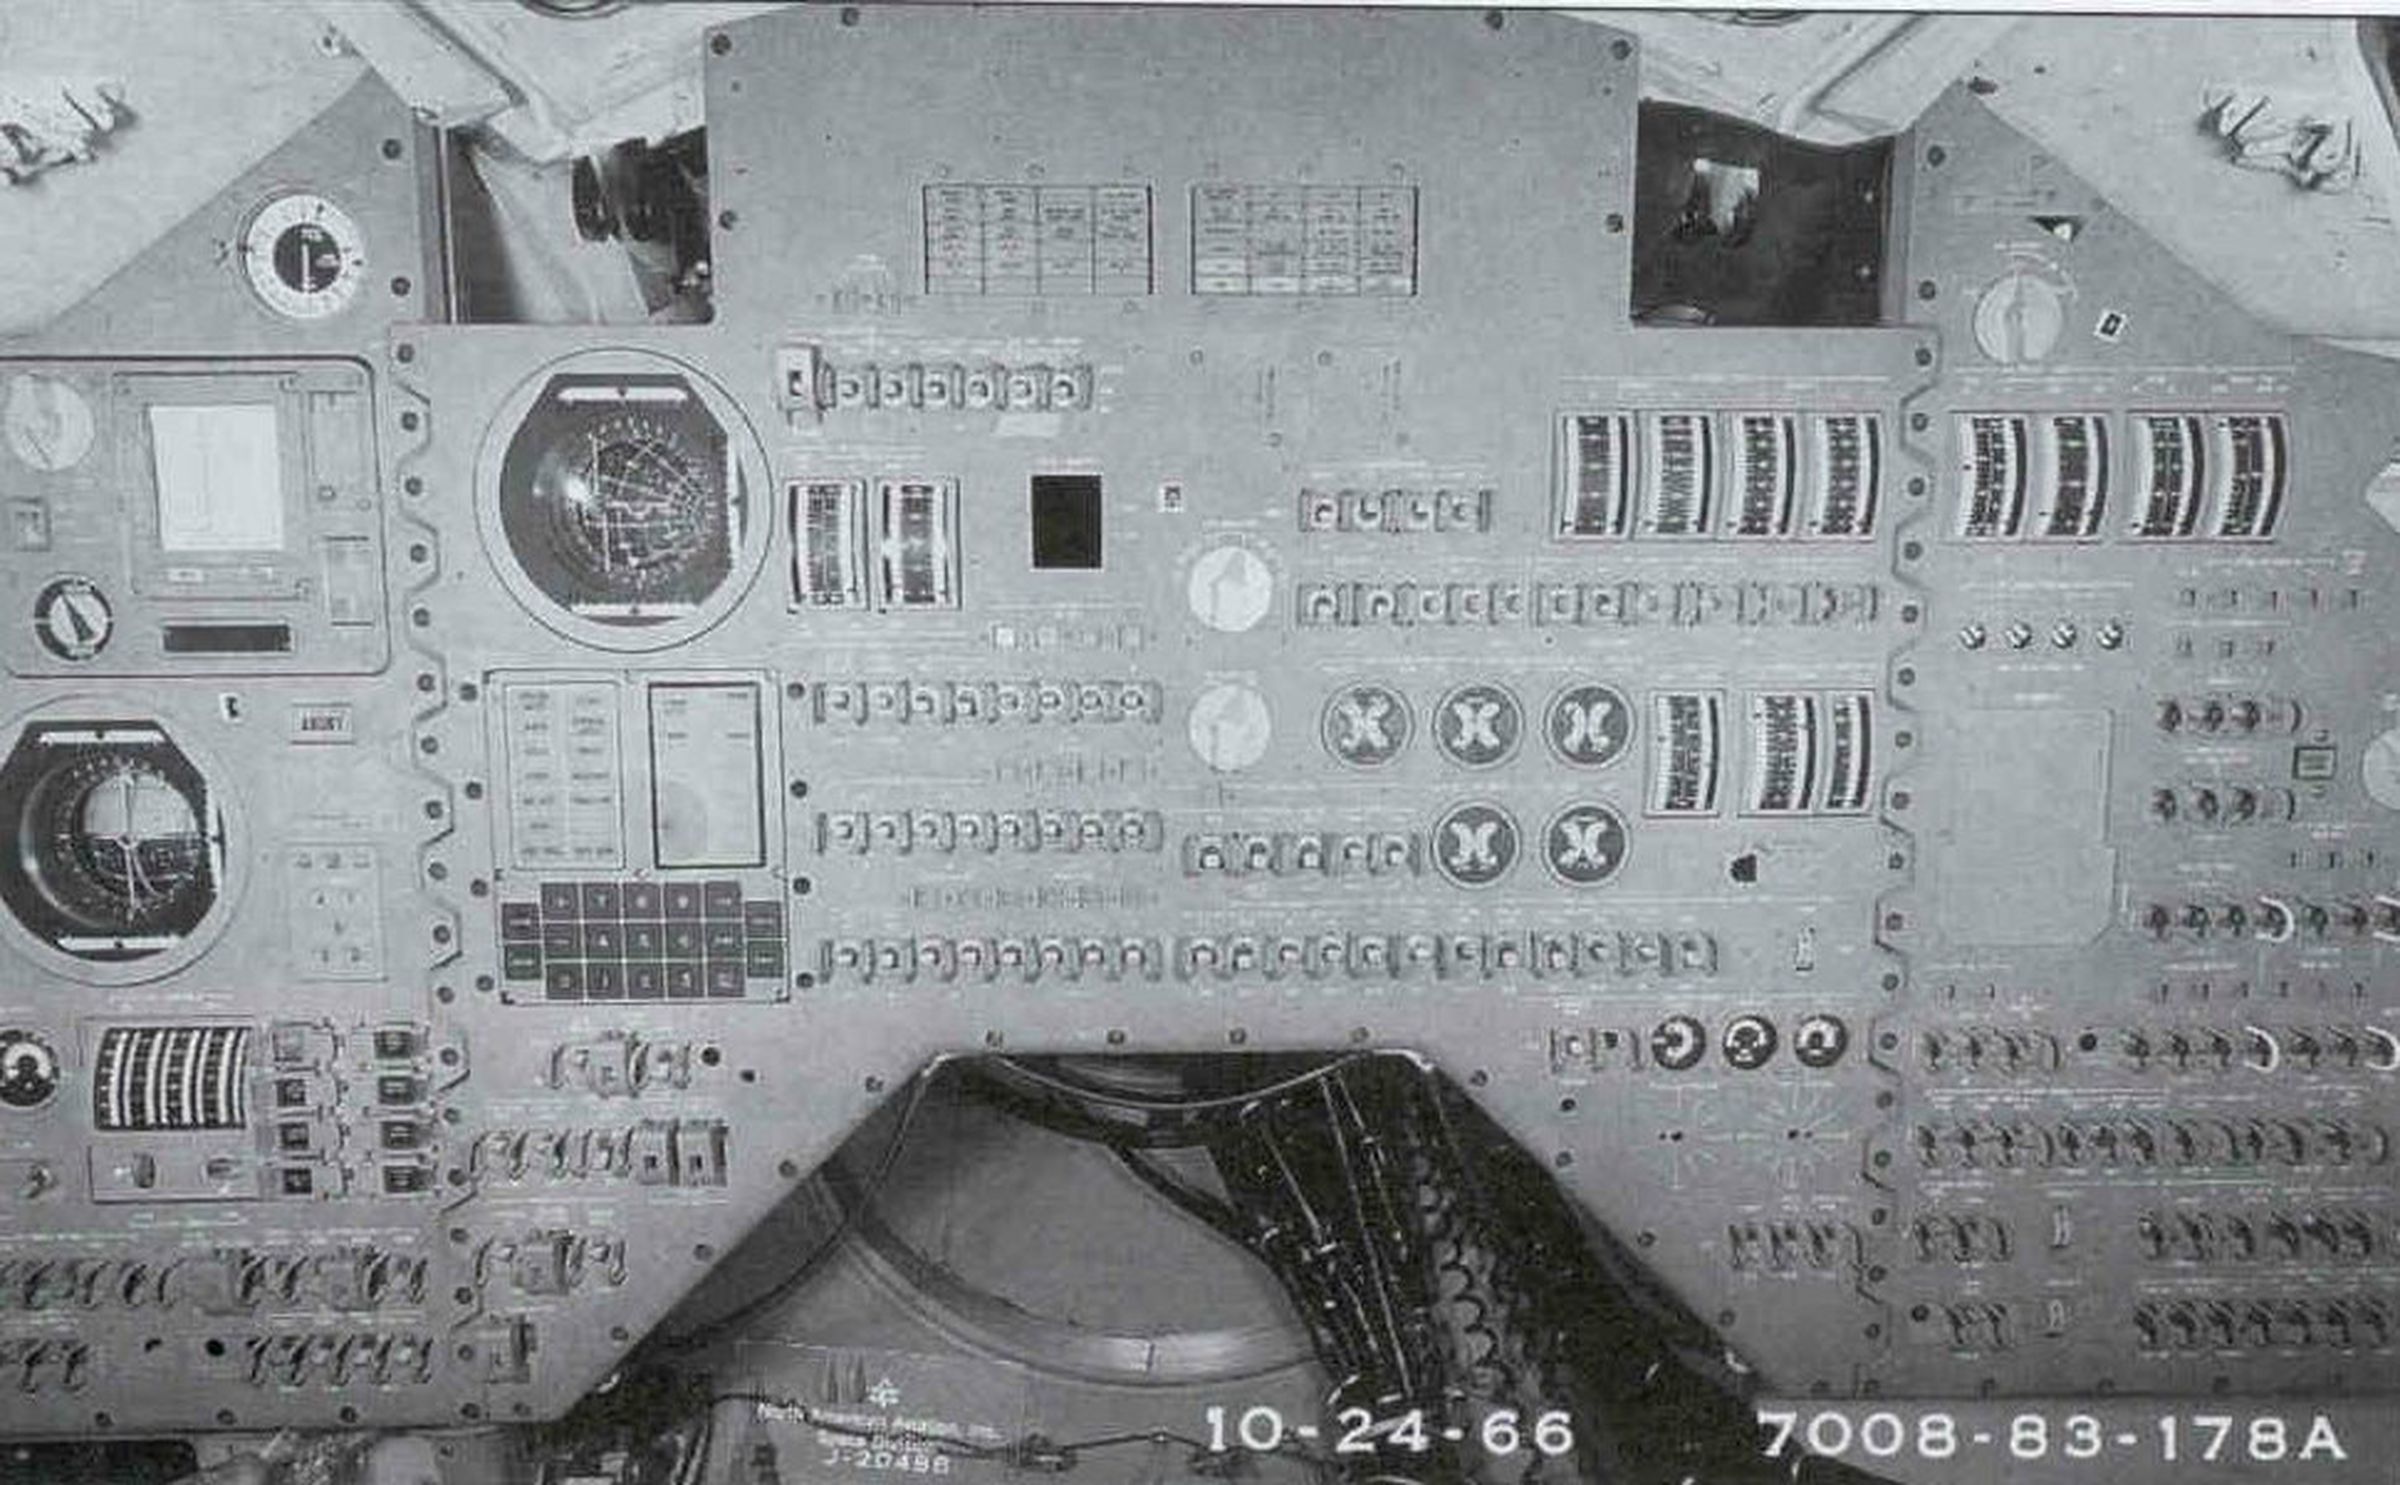 The inside of the Apollo command module, which housed the guidance computer.